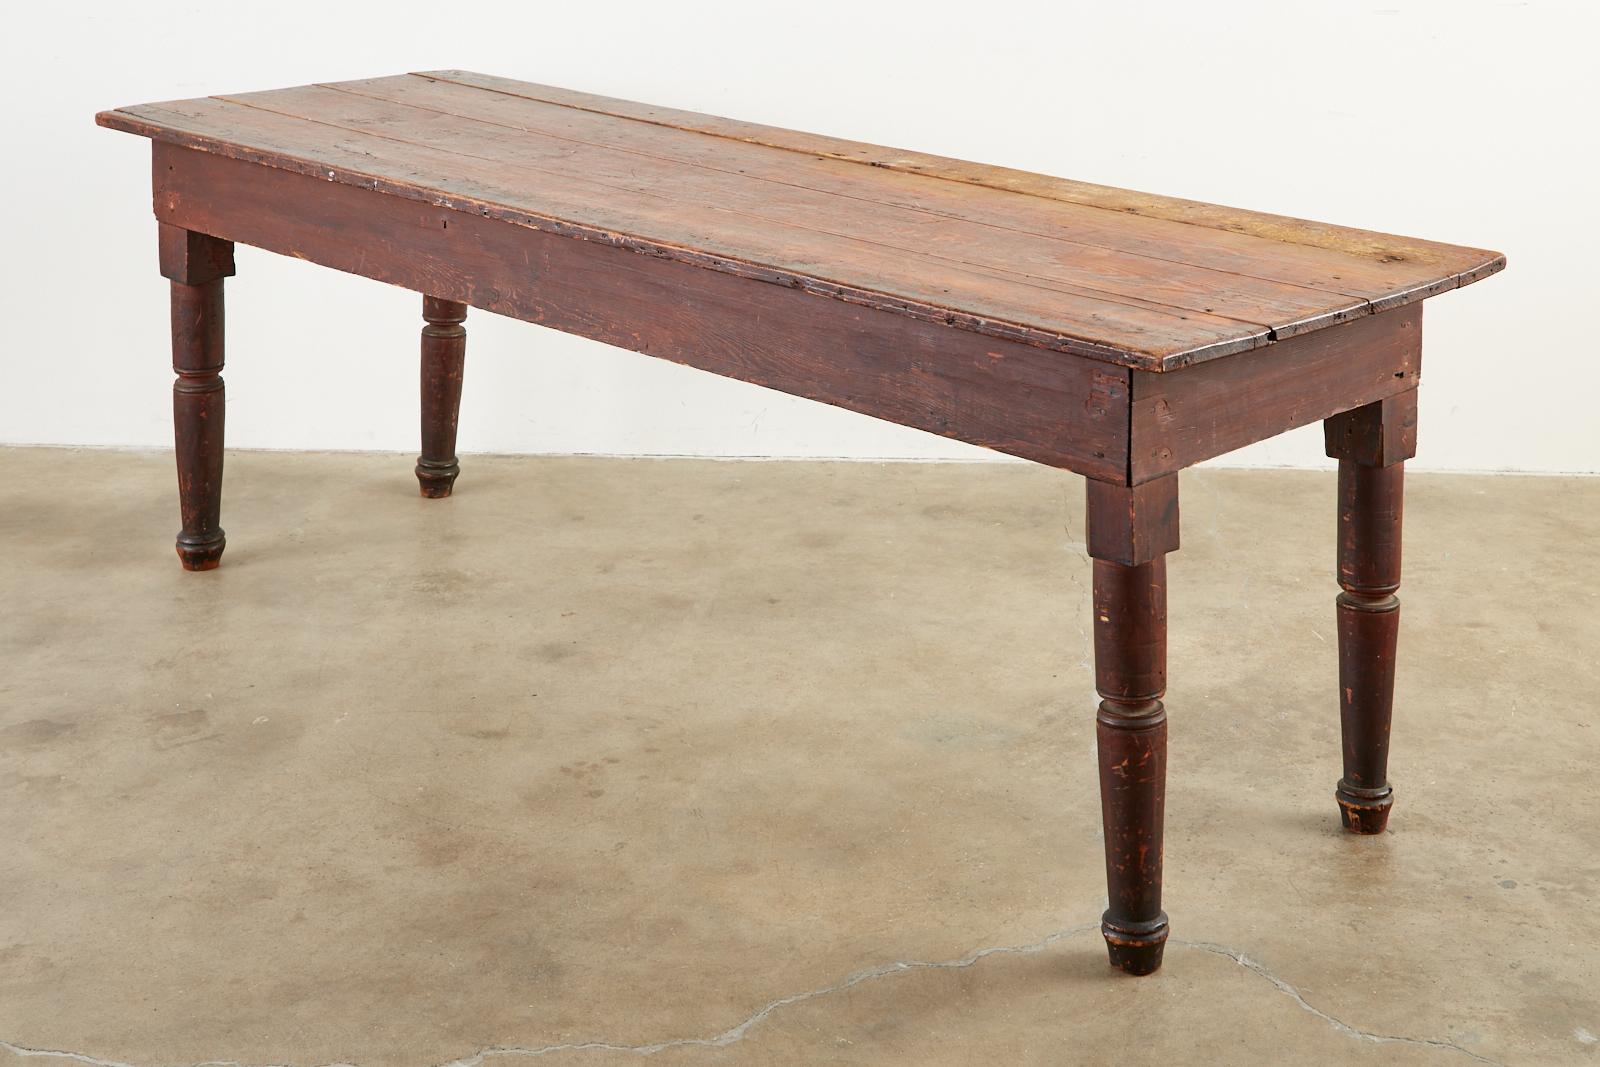 Rustic early 19th century country American farmhouse work table. Features a 1 inch thick pine plank top. Constructed with hand-made nails and later machine made nails having some older repairs. Each side of the table measures 25.5 inches from the